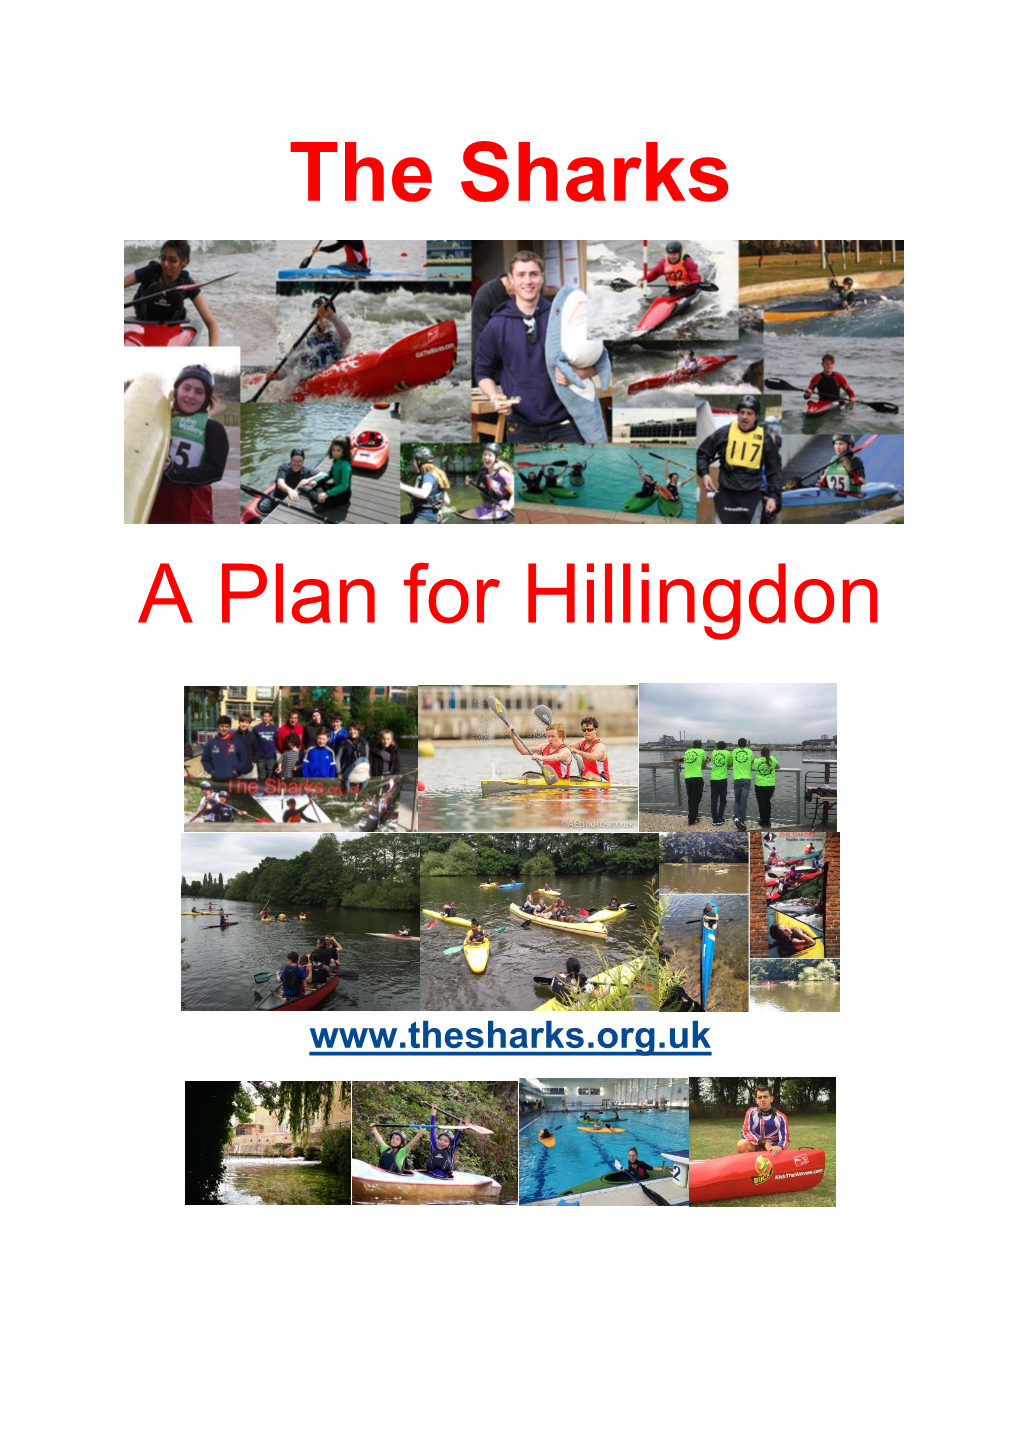 The Sharks a Plan for Hillingdon